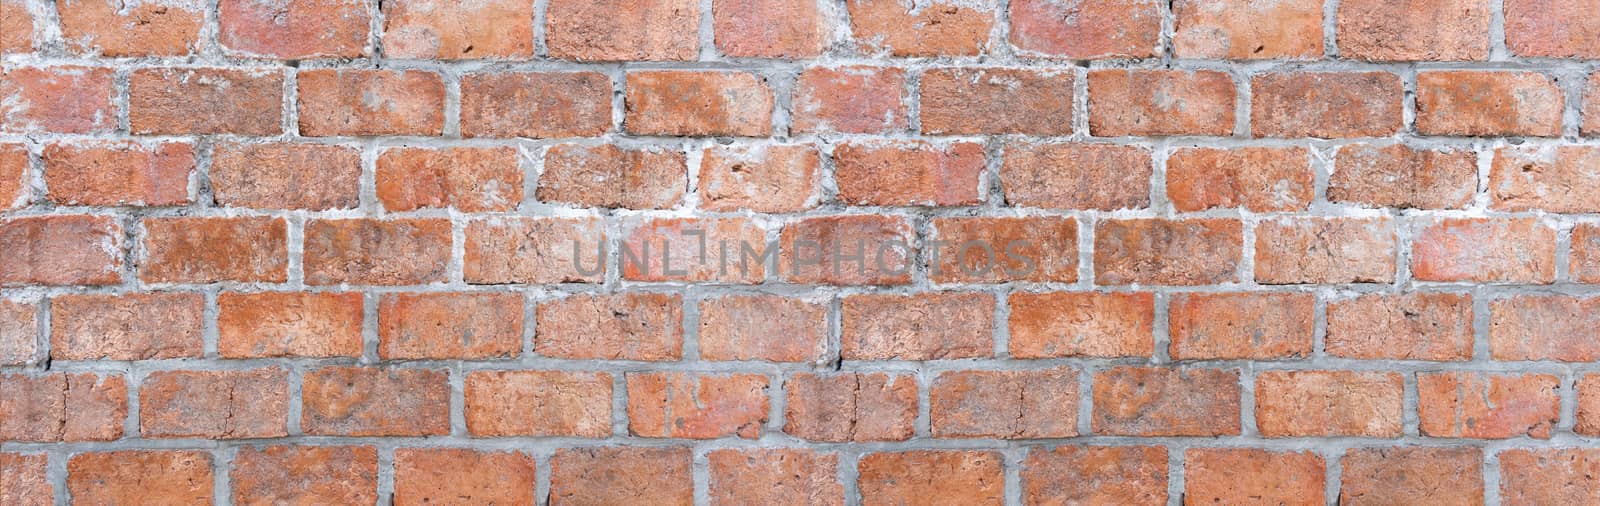 Abstract red brick wall texture light gray old stucco and vintage brickwork pattern background in home interior, grunge rusty blocks of stonework grey color panoramic wide wallpaper